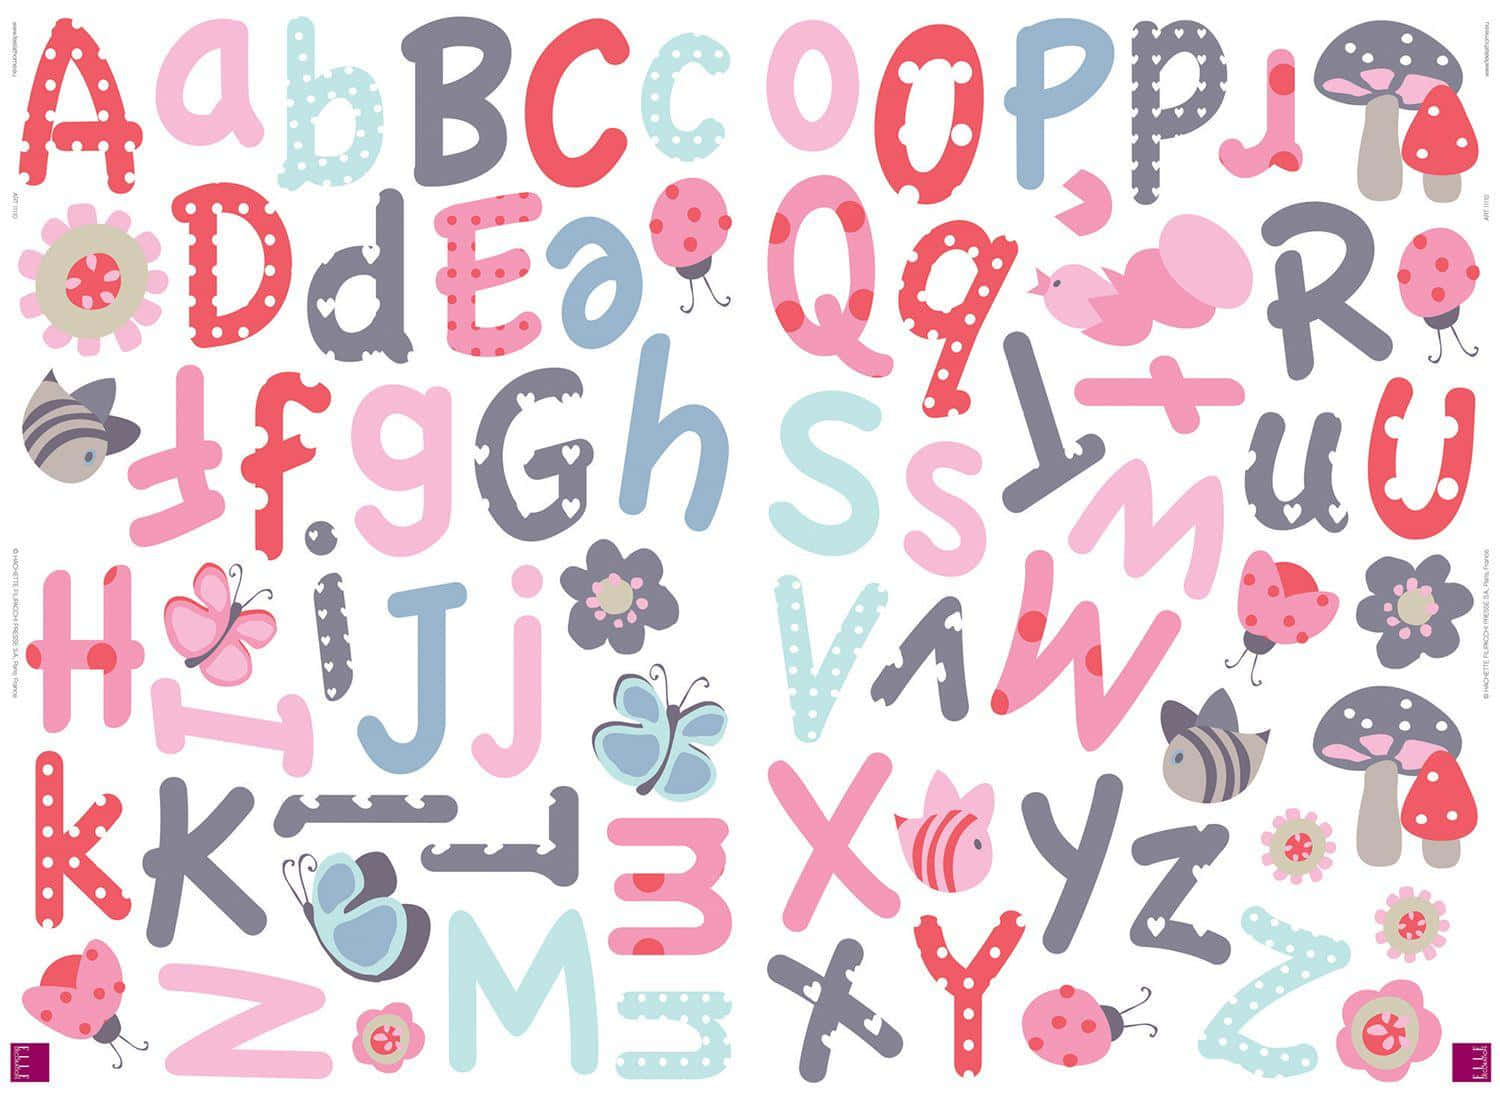 A Colorful Alphabet With Butterflies And Flowers